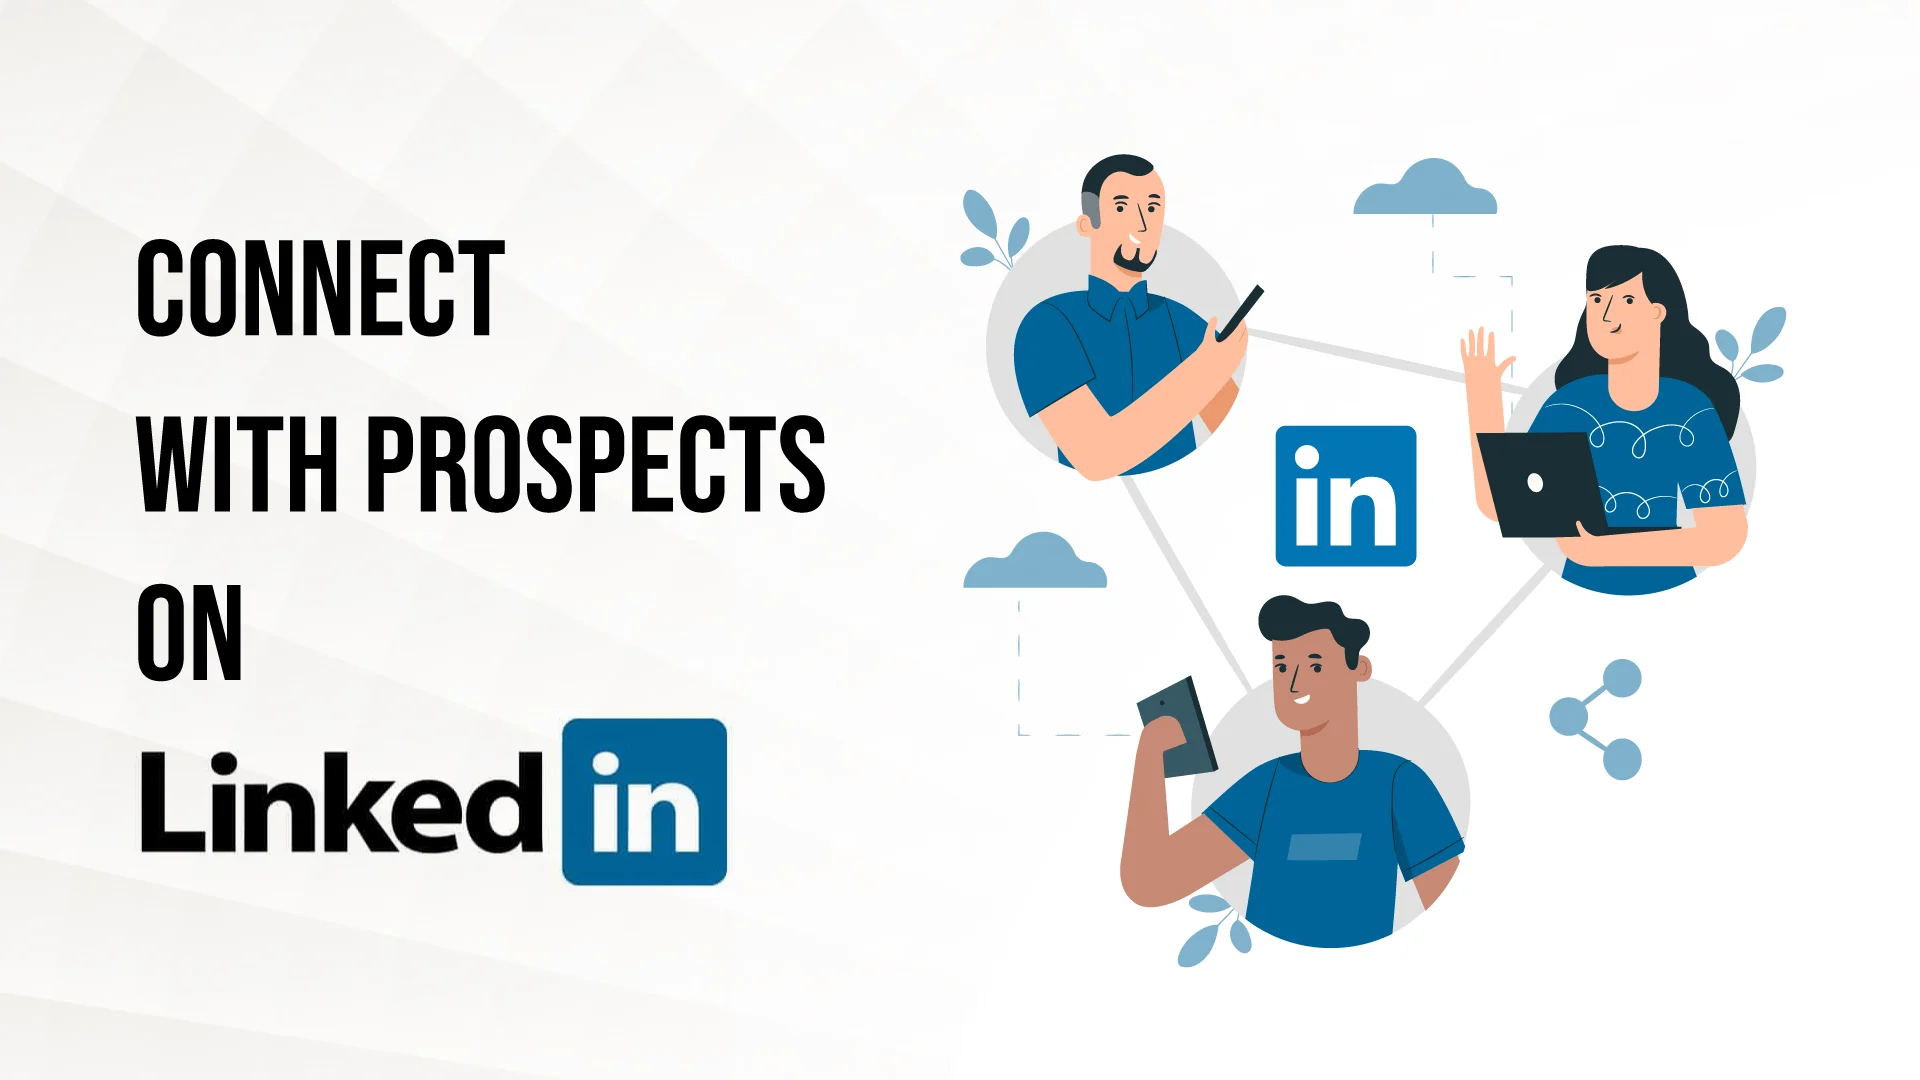 Connect with prospects on LinkedIn